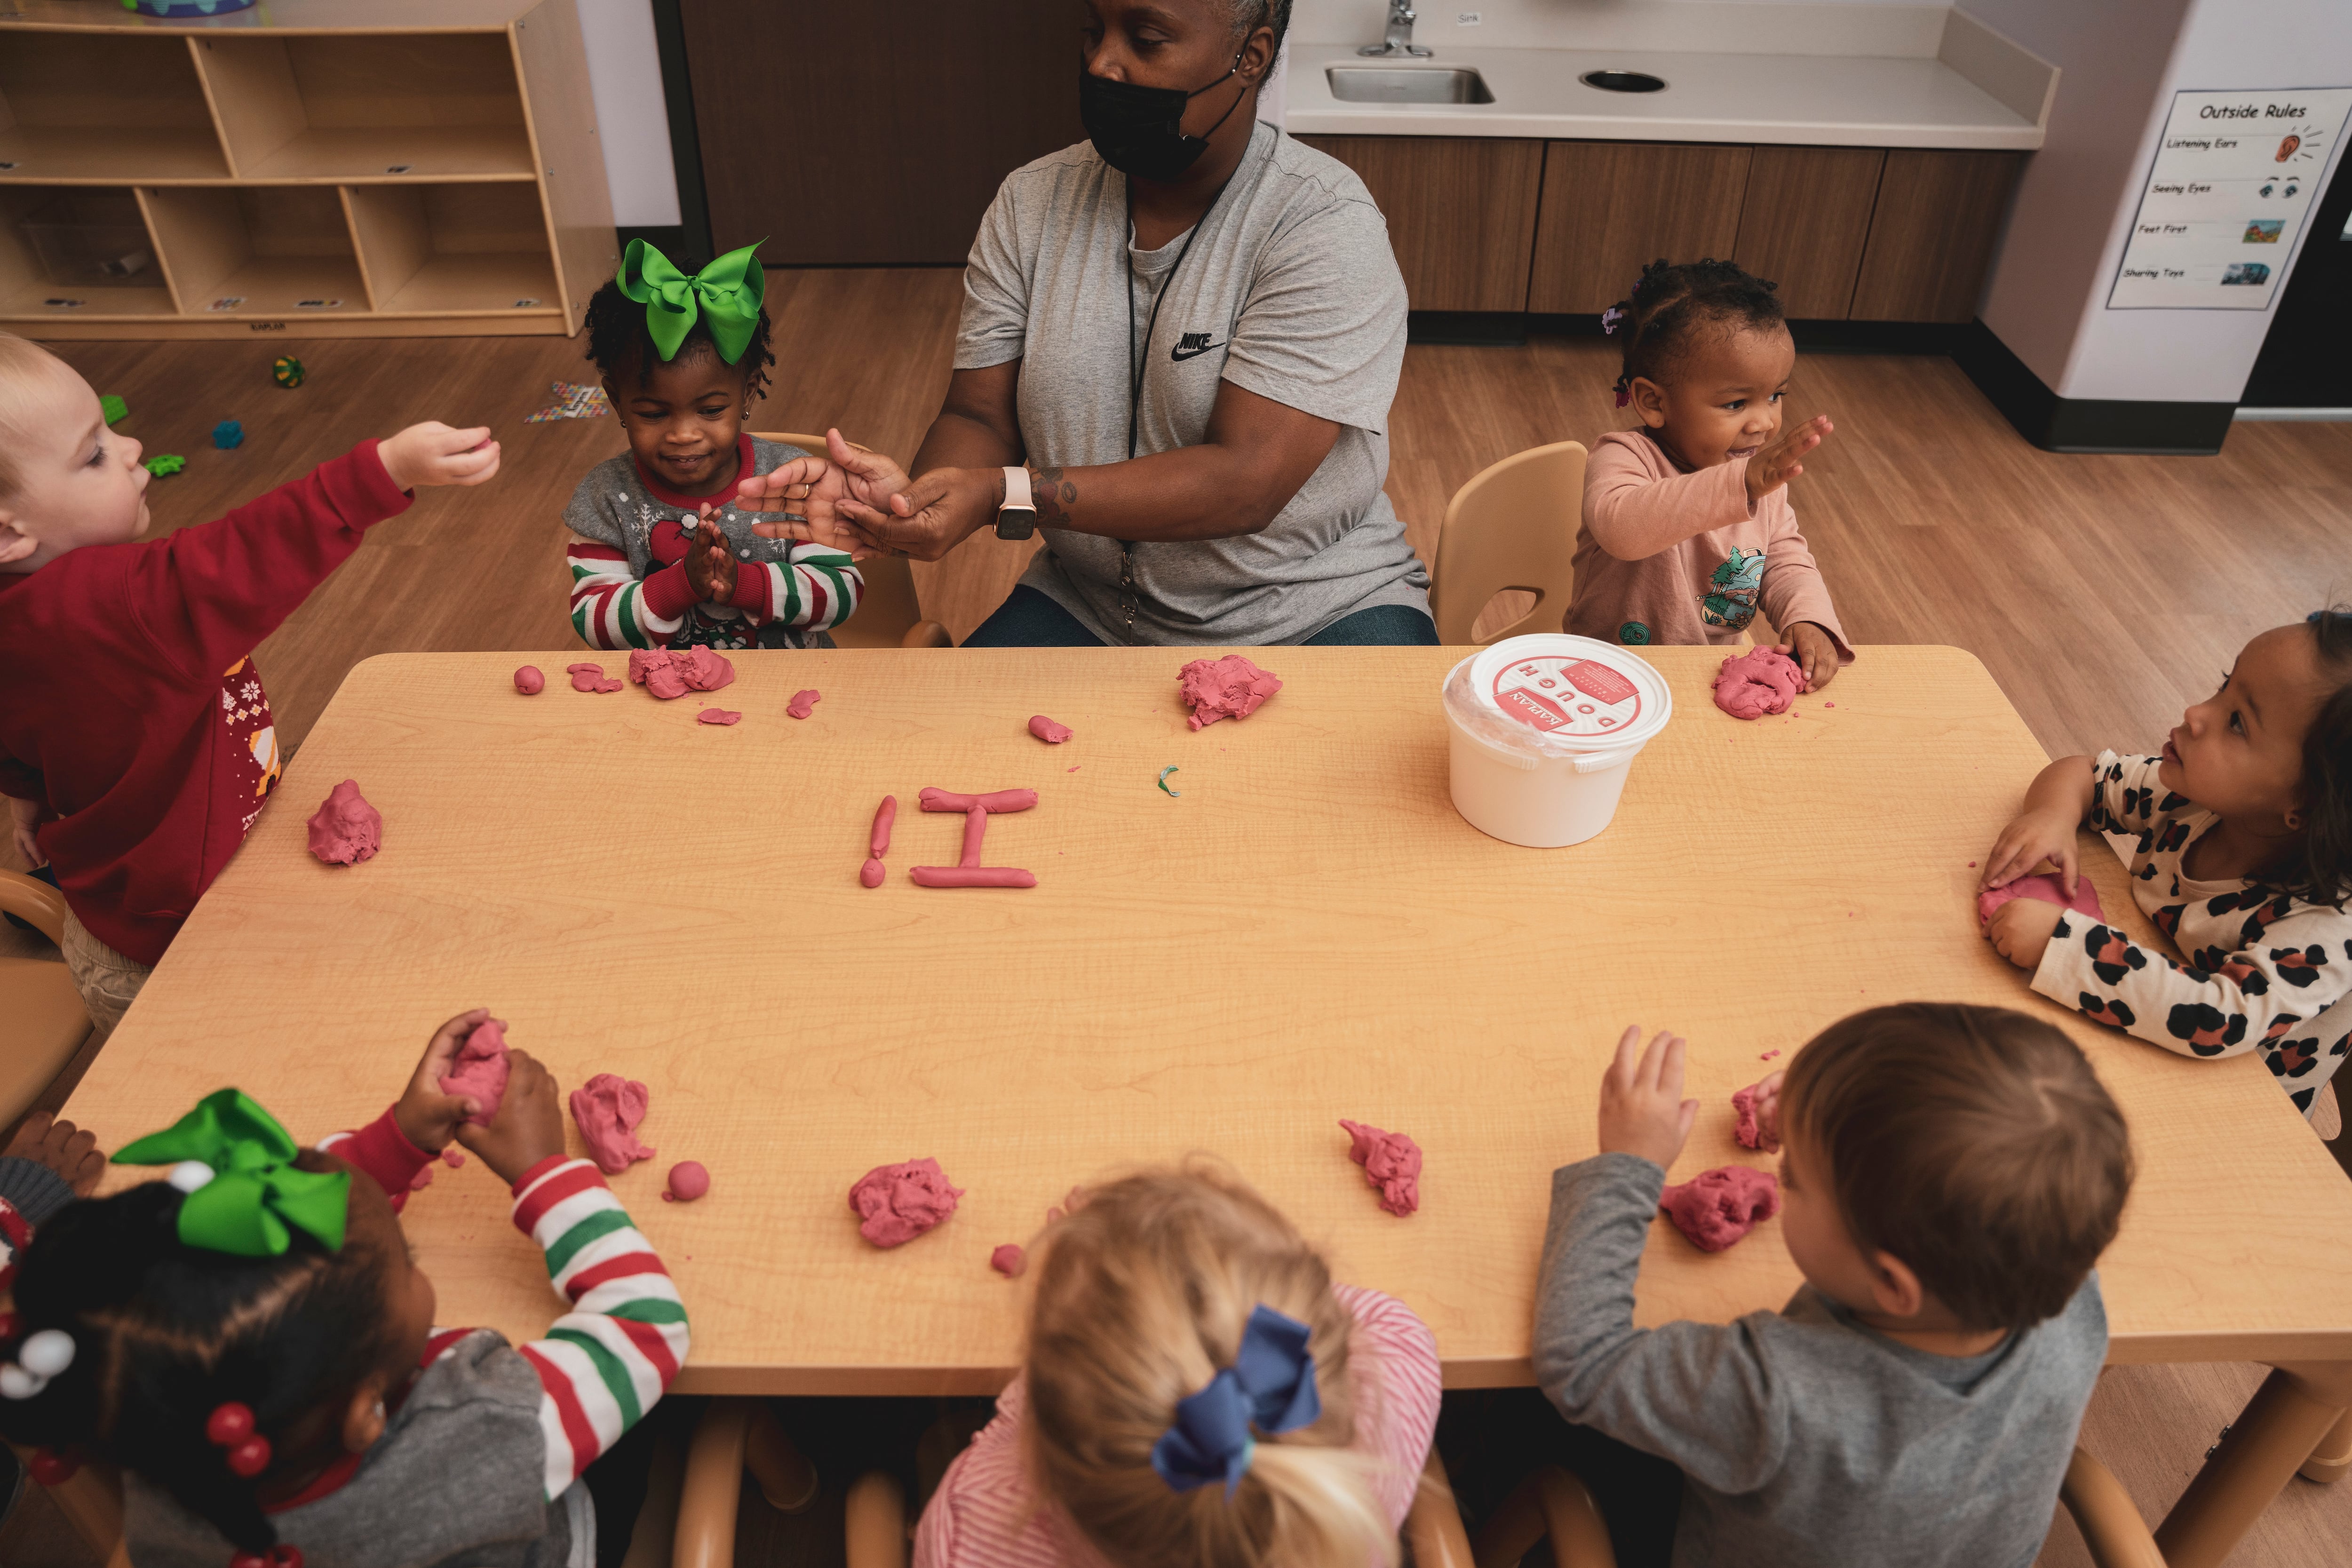 A preschool teacher at a table surrounded by children uses Play-Doh to shape letters of the alphabet.